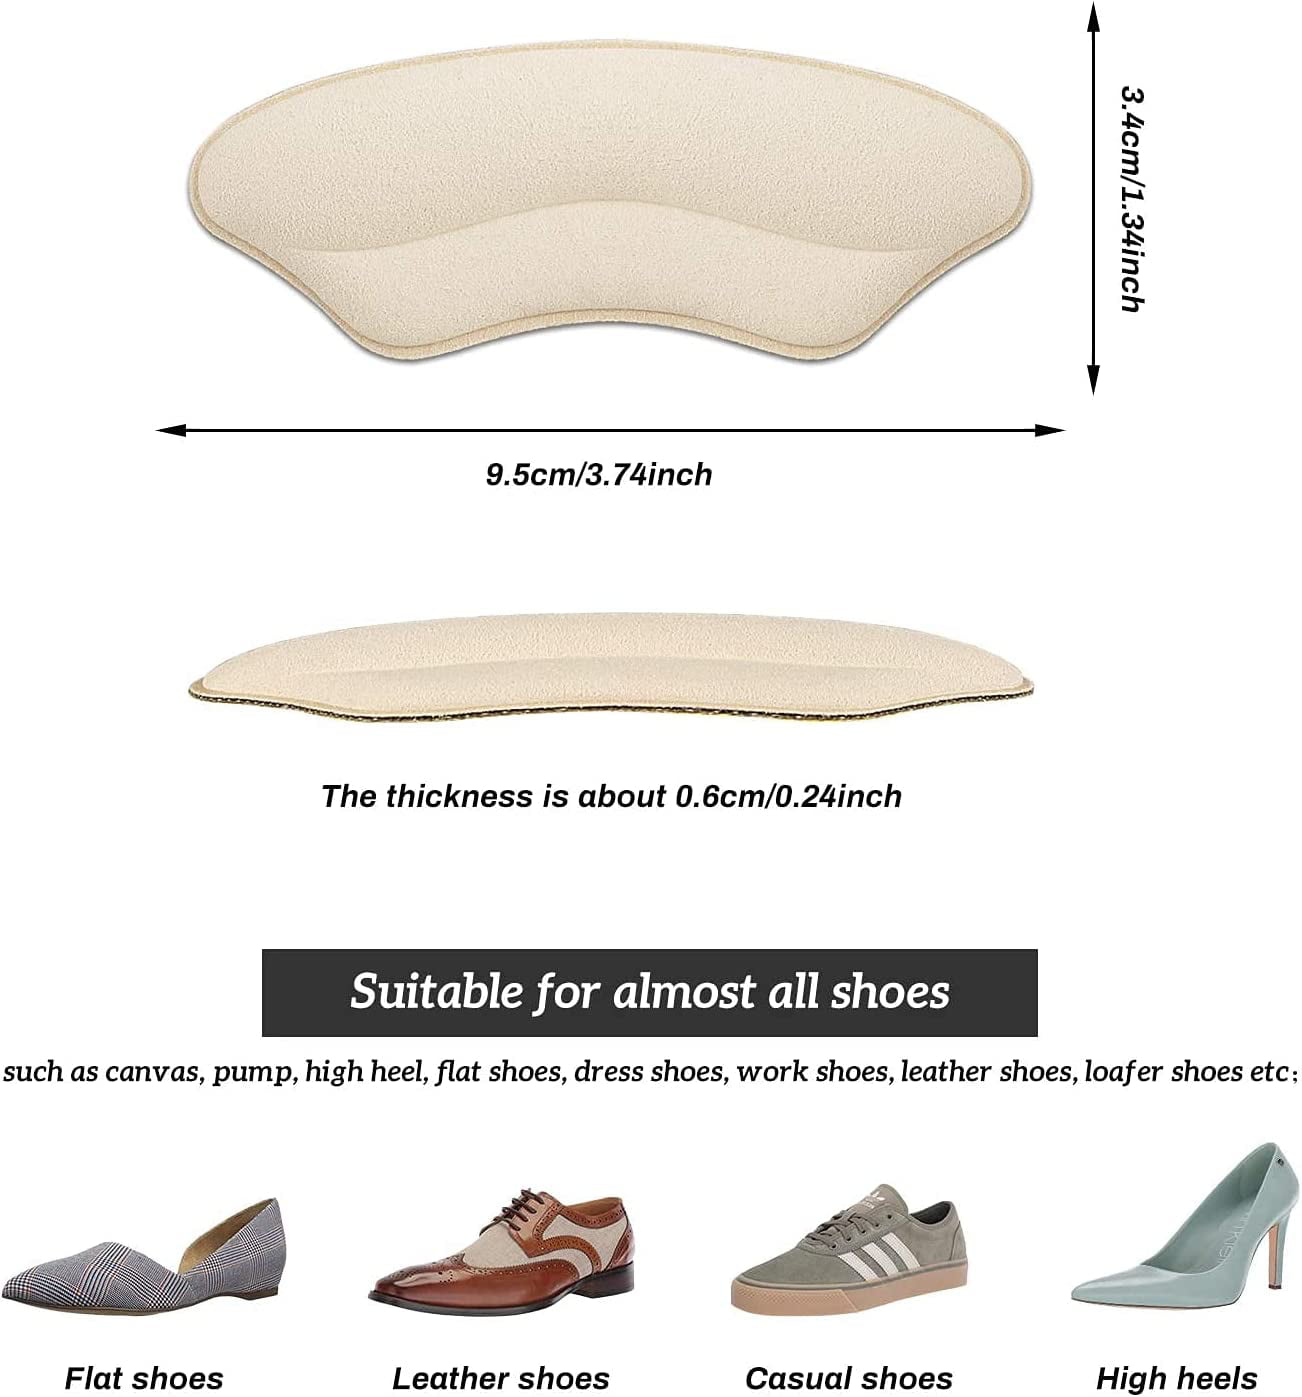 Amazon.com: Gel Heel Pads [12 PCS] Soft High Heel Pads Shoe Pads Silicone  Gel Heel Cushion Inserts for Women Foot Care Shoe Inserts Pad Insoles,  Prevent Back Heel Pain and Improve Loose